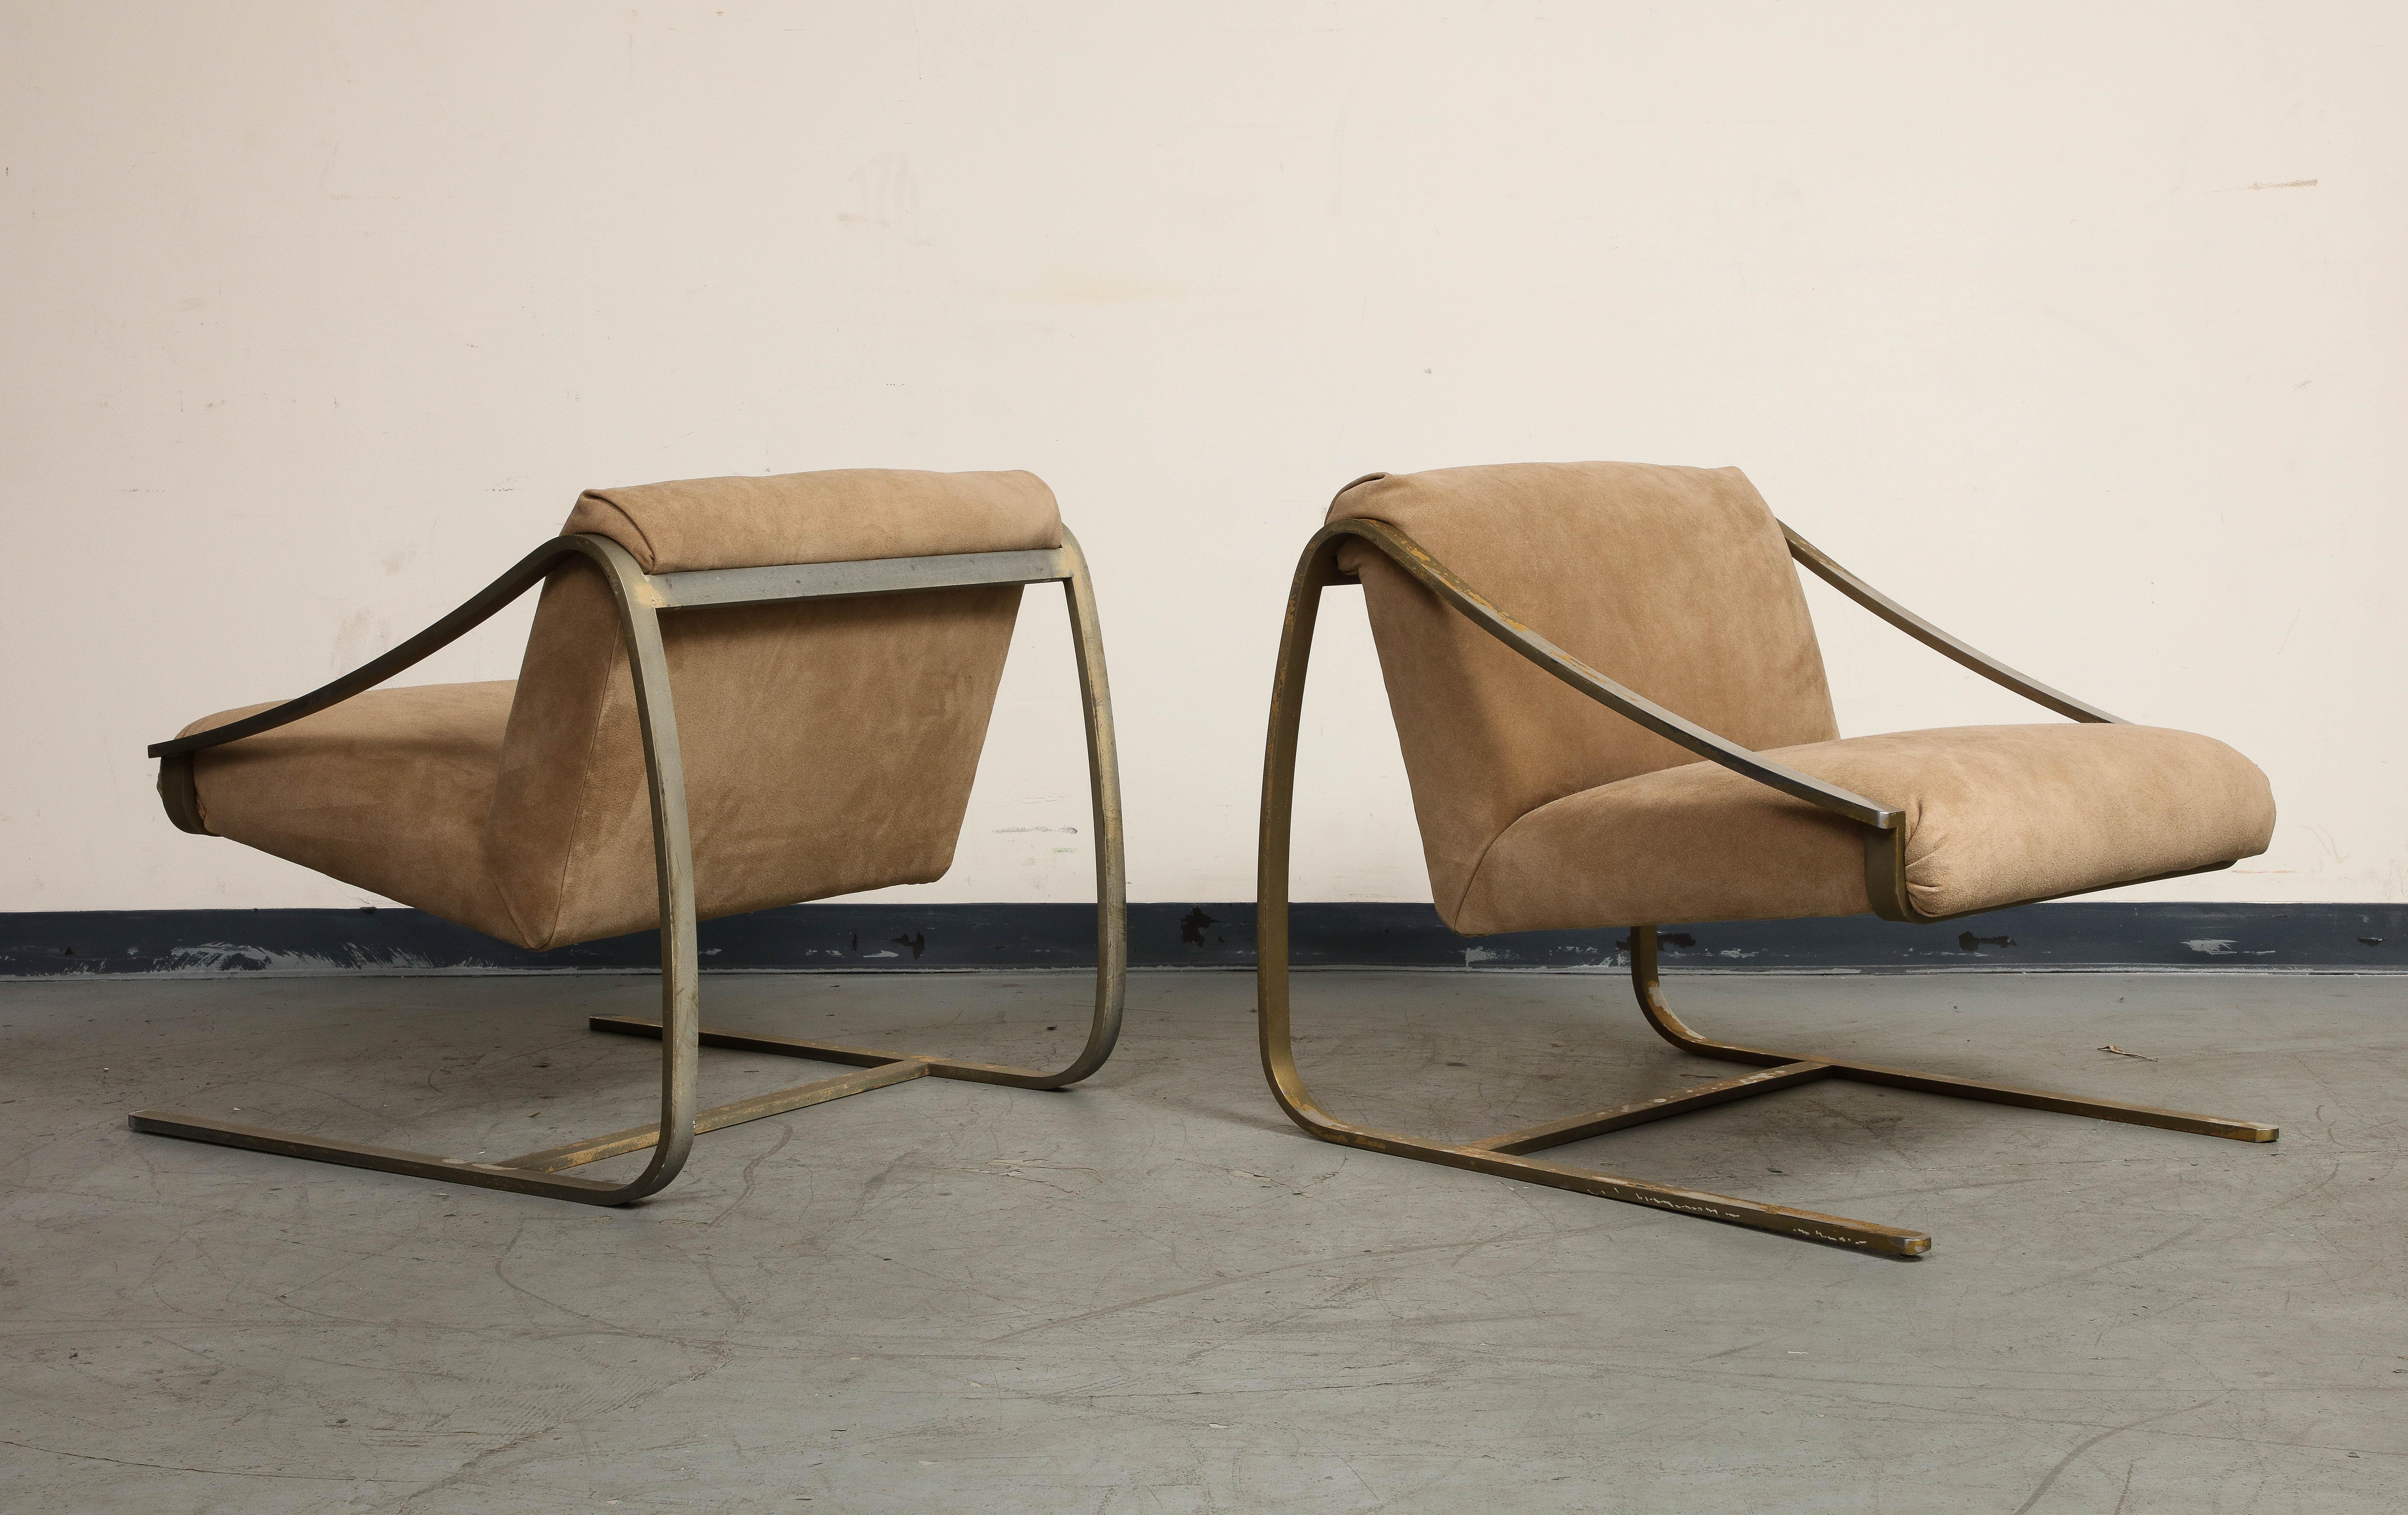 Pair of Bronze and Suede Modernist Lounge Chairs, circa 1965 For Sale 3